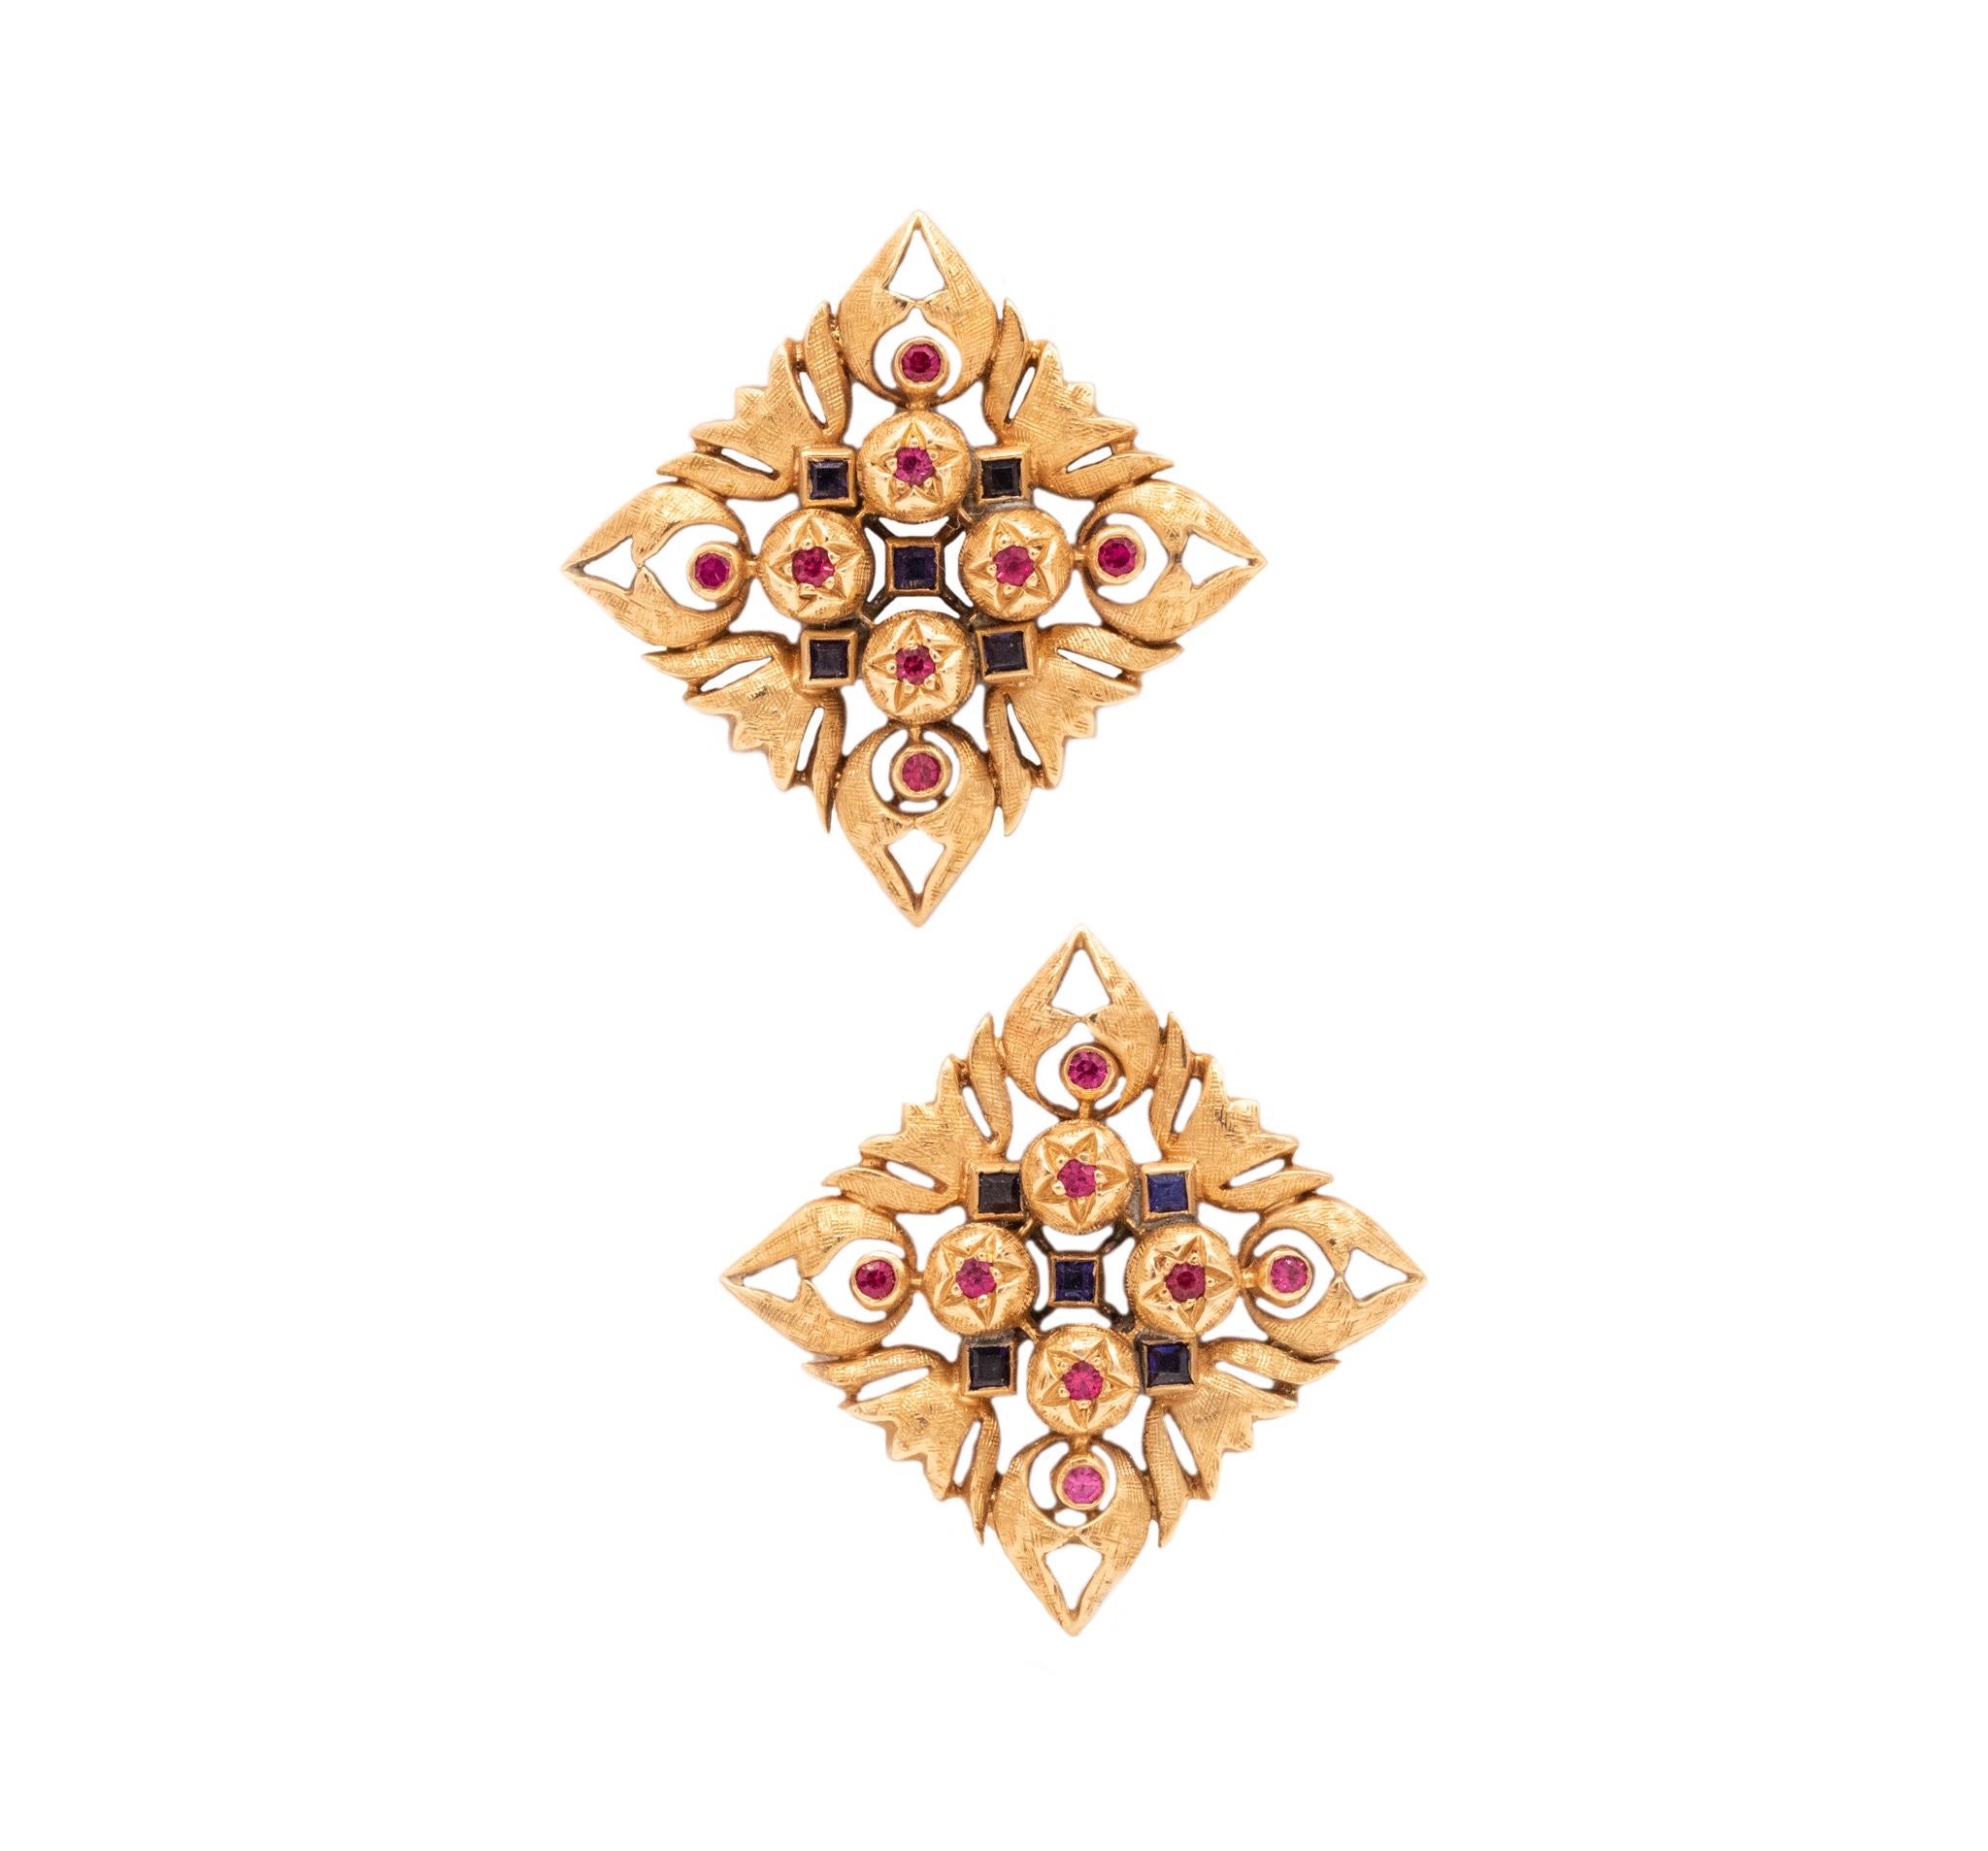 Florentine Renaissance pair of jeweled clips

A vintage renaissance revival pieces made in Florence, Italy back in the 1930's. This beautiful clips-earrings has been crafted in solid yellow gold of 18 karats and finished with textured Renaissance